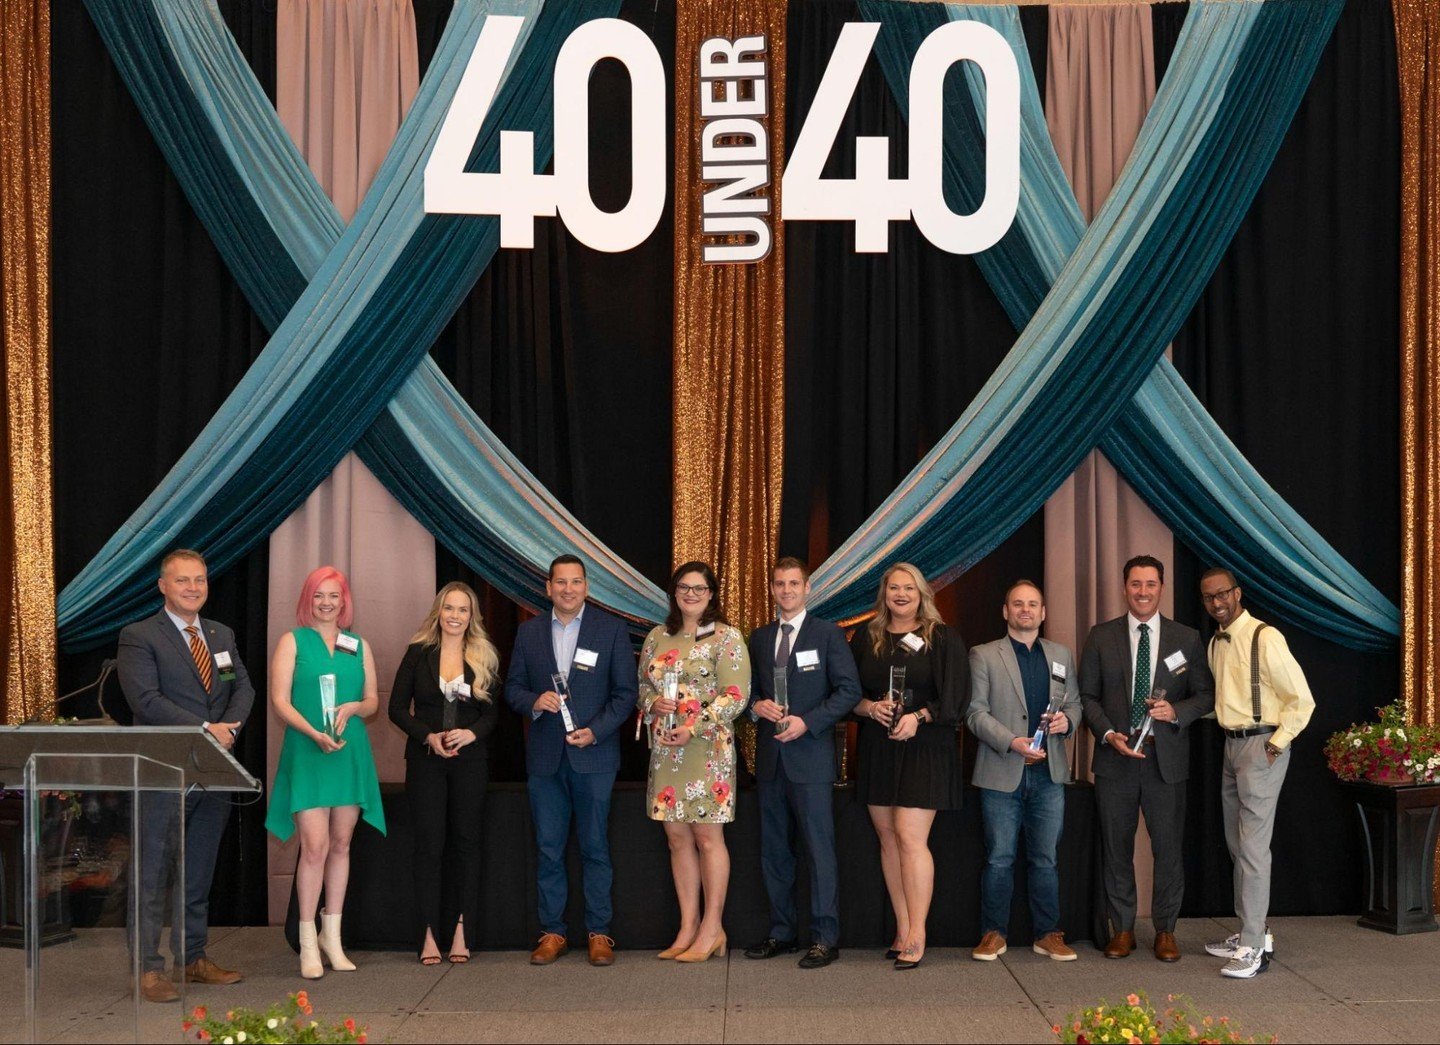 Counting down to the Albany 40 Under 40 ceremony today! 🌟 As we celebrate the incredible achievements of Albany's brightest stars, we can&rsquo;t help but reminisce on the last two years' amazing events. Here's to another year of success, growth, an